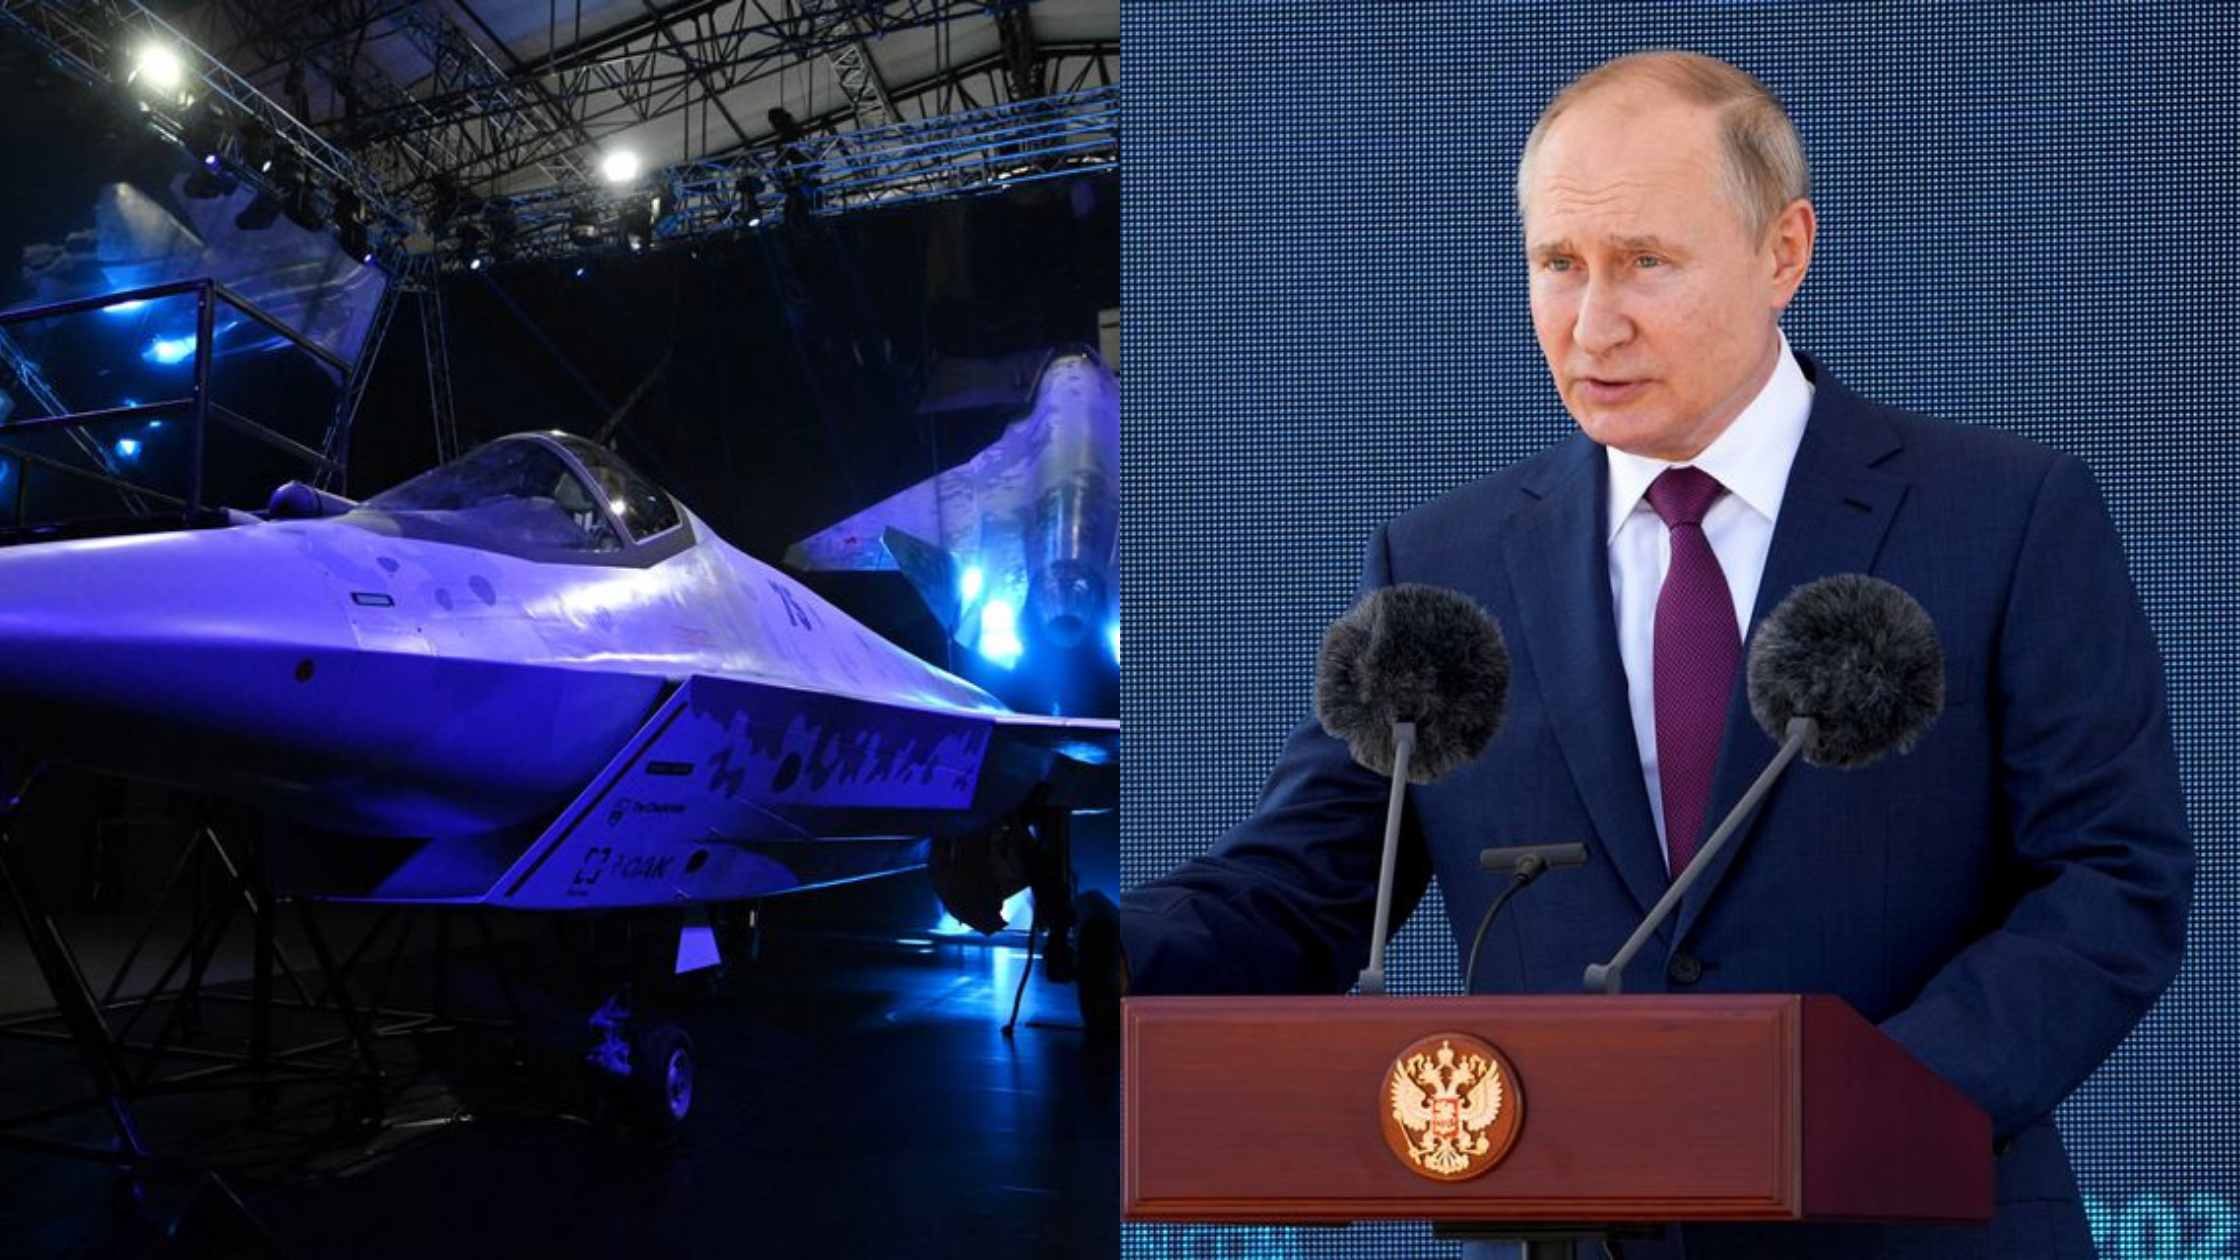 President Putin Inspects New Russian Fighter Jet At MAKS Air Show (5 Photos)